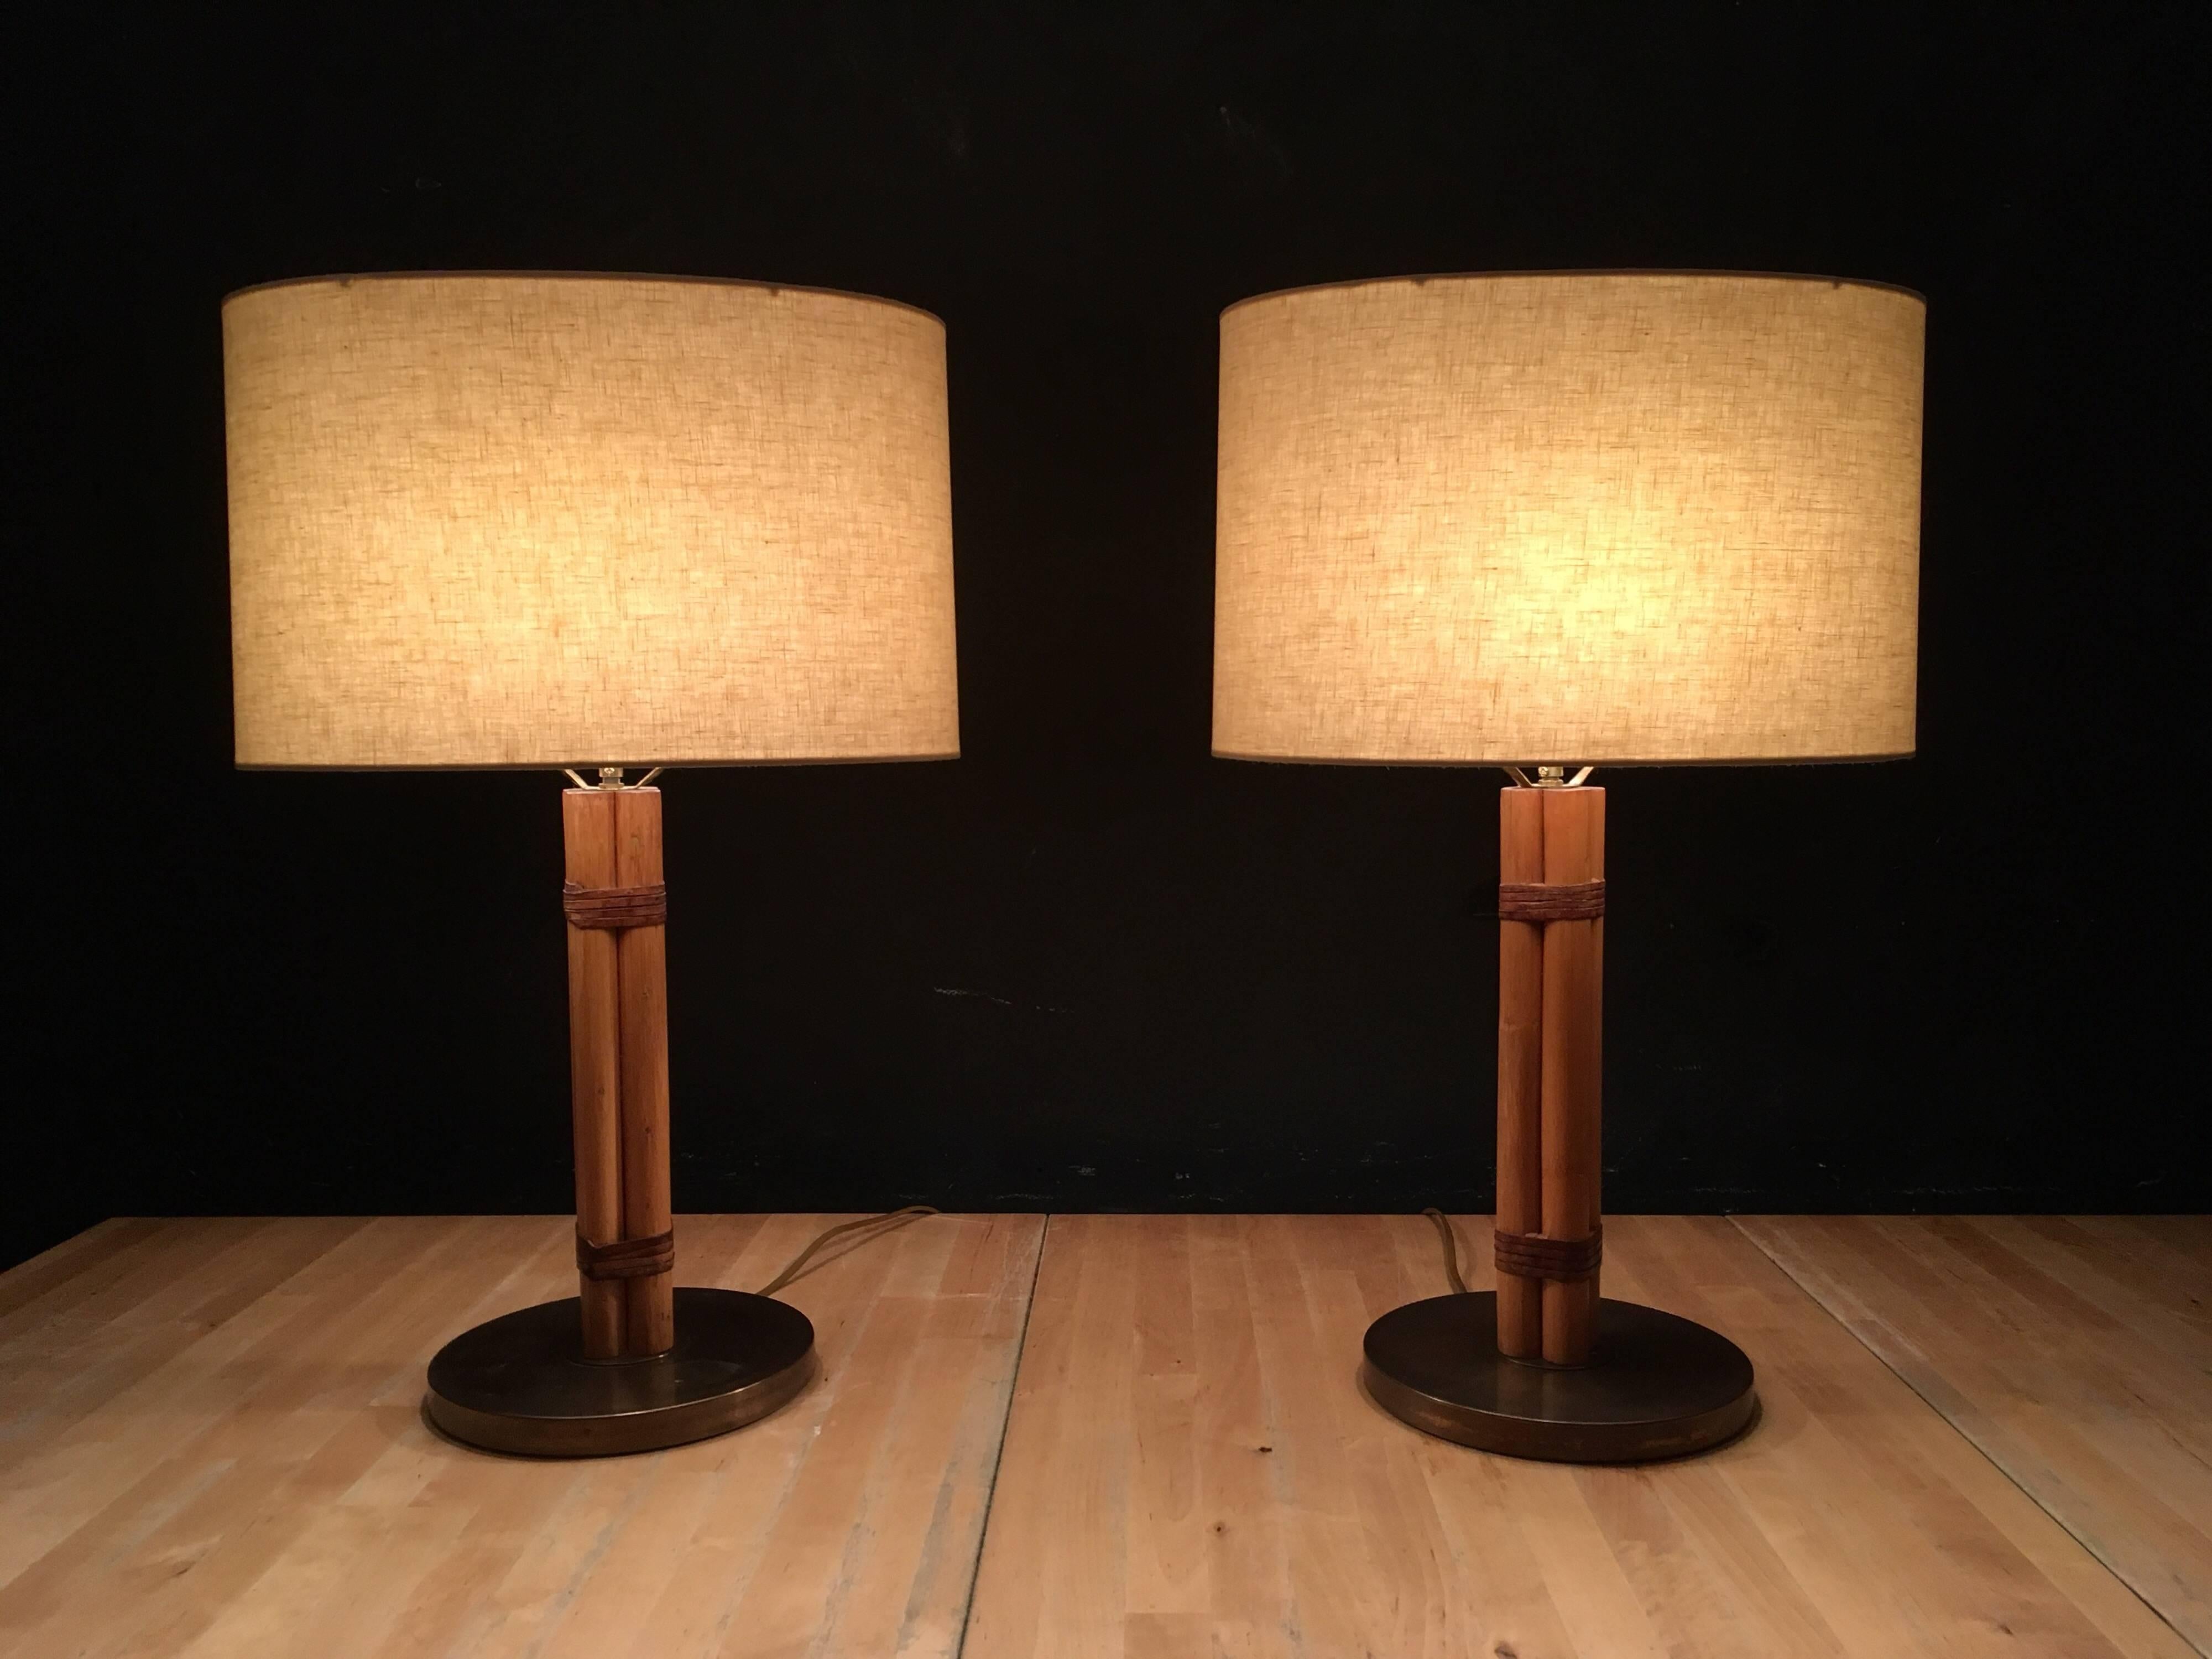 Beautiful Table Lamps, bamboo stems with leather details. Brass bases have a great patina. Made by Bergboms in Sweden.